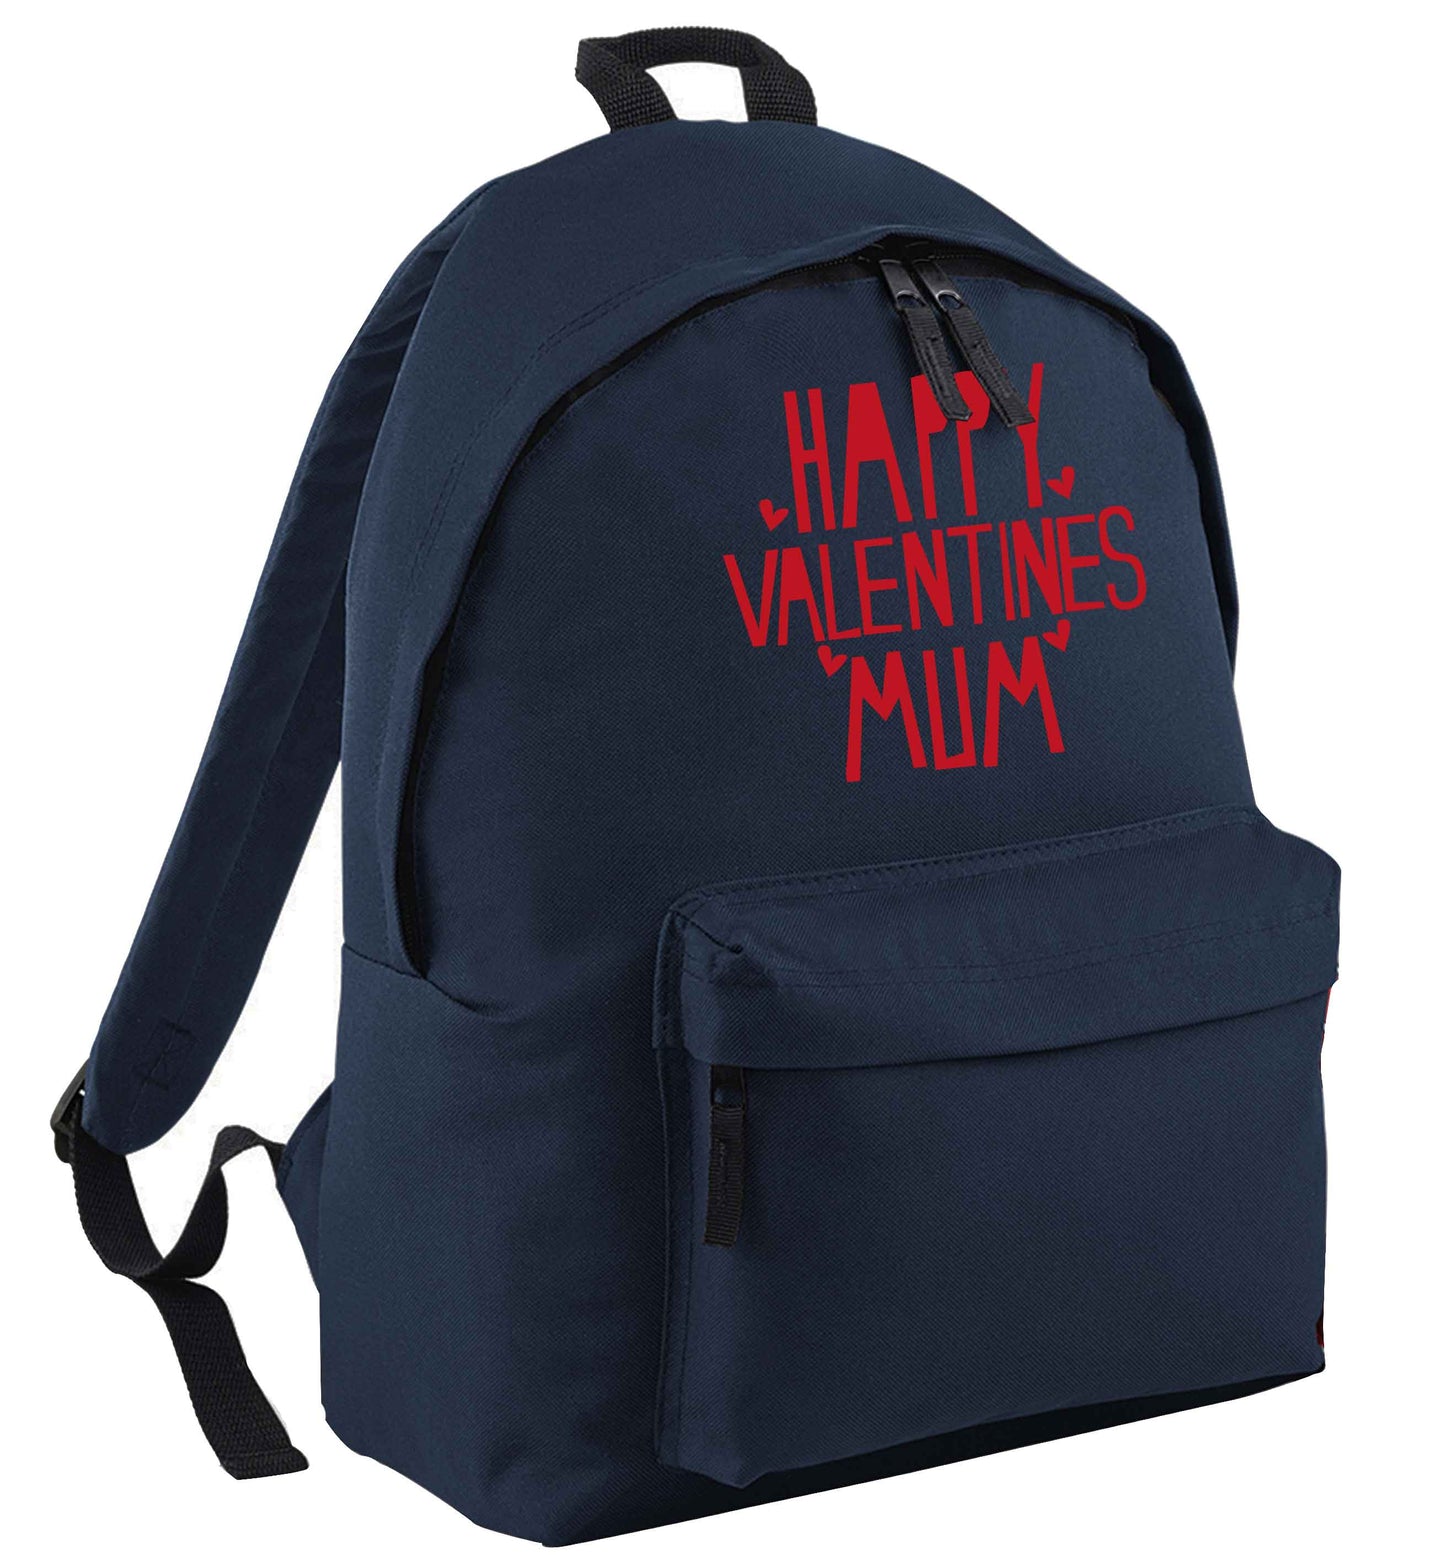 Happy valentines mum navy adults backpack